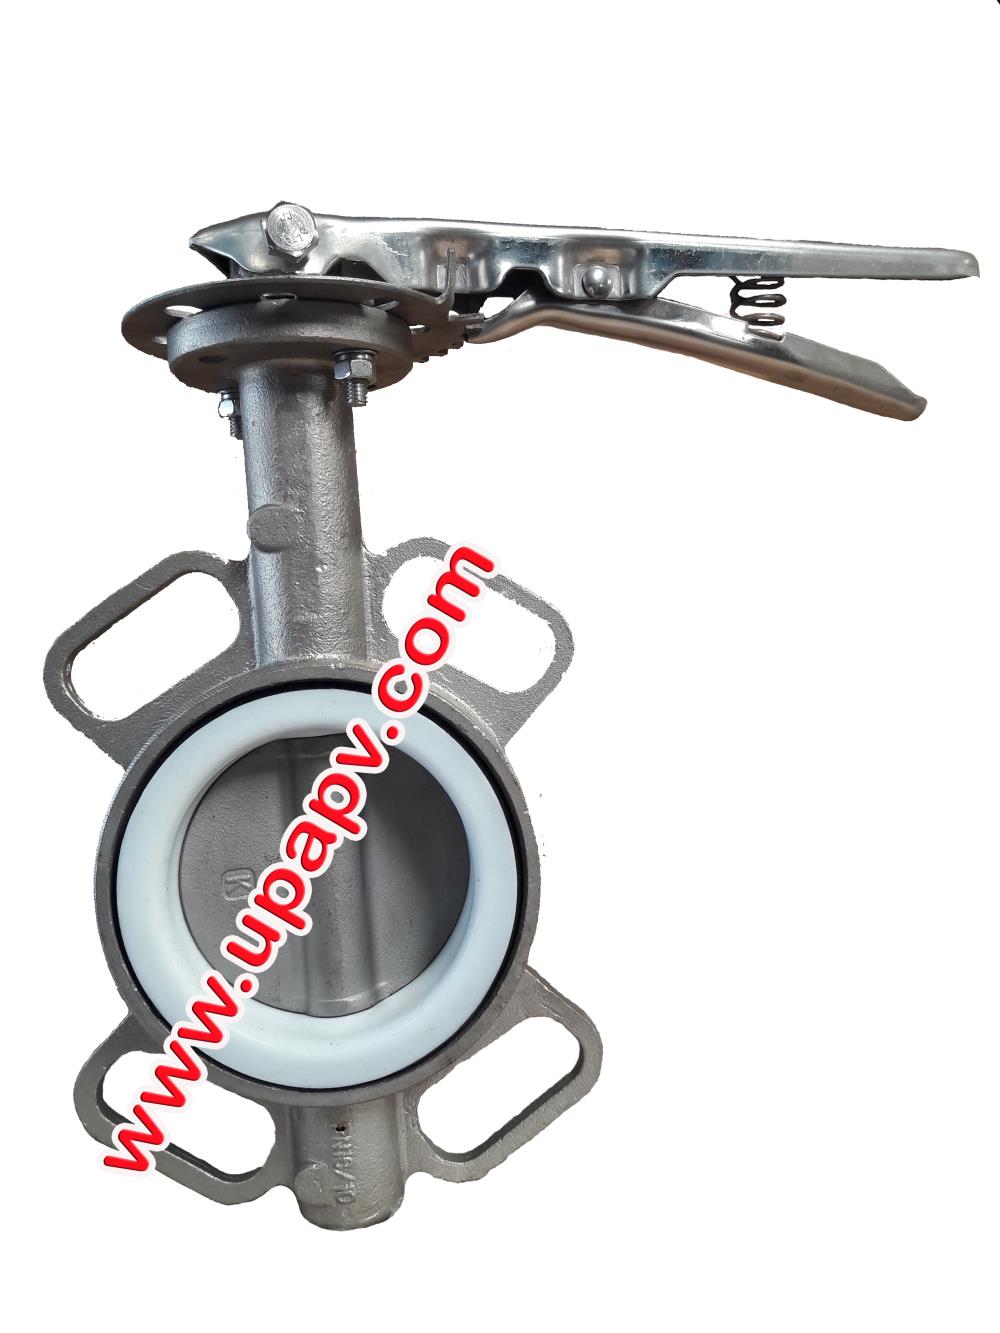 Butterfly valve Wafer,BUTTERFLY VALVE, DUO CHECK VALVE, FLEXIBLE RUBBER JOINT , PNEUMATIC ACTUATOR, 5/2 NAMUR SOLENOID VALVE,     LIMIT SWITCH,WECA,Tool and Tooling/Other Tools